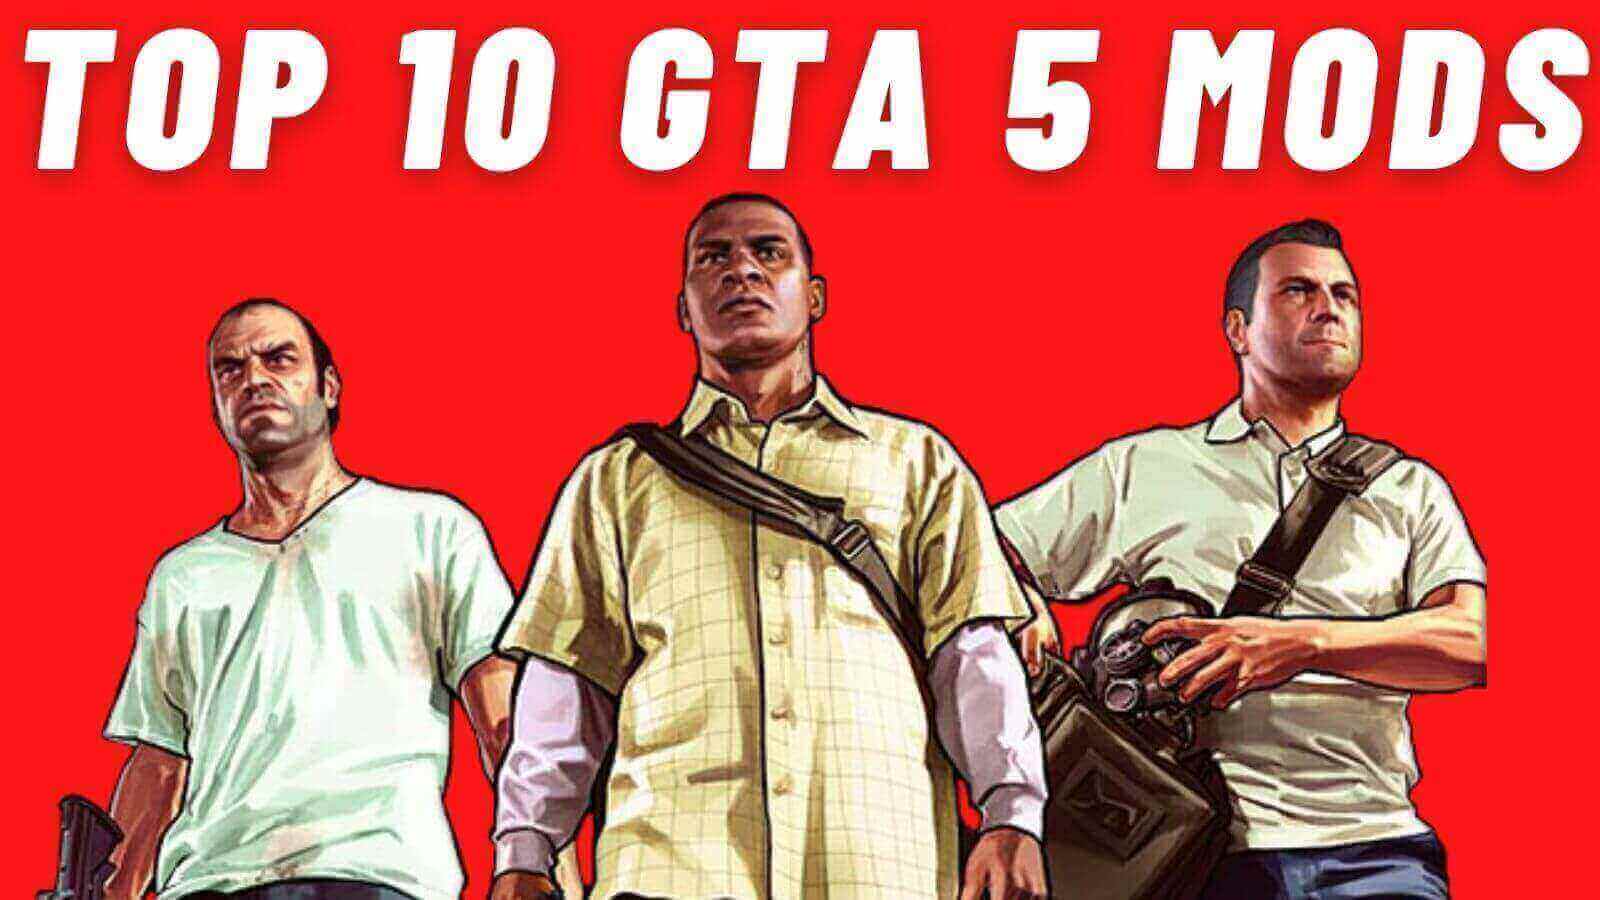 Top 10 Best Grand Theft Auto 5 Mods In 2021-2022 (With Download Links)